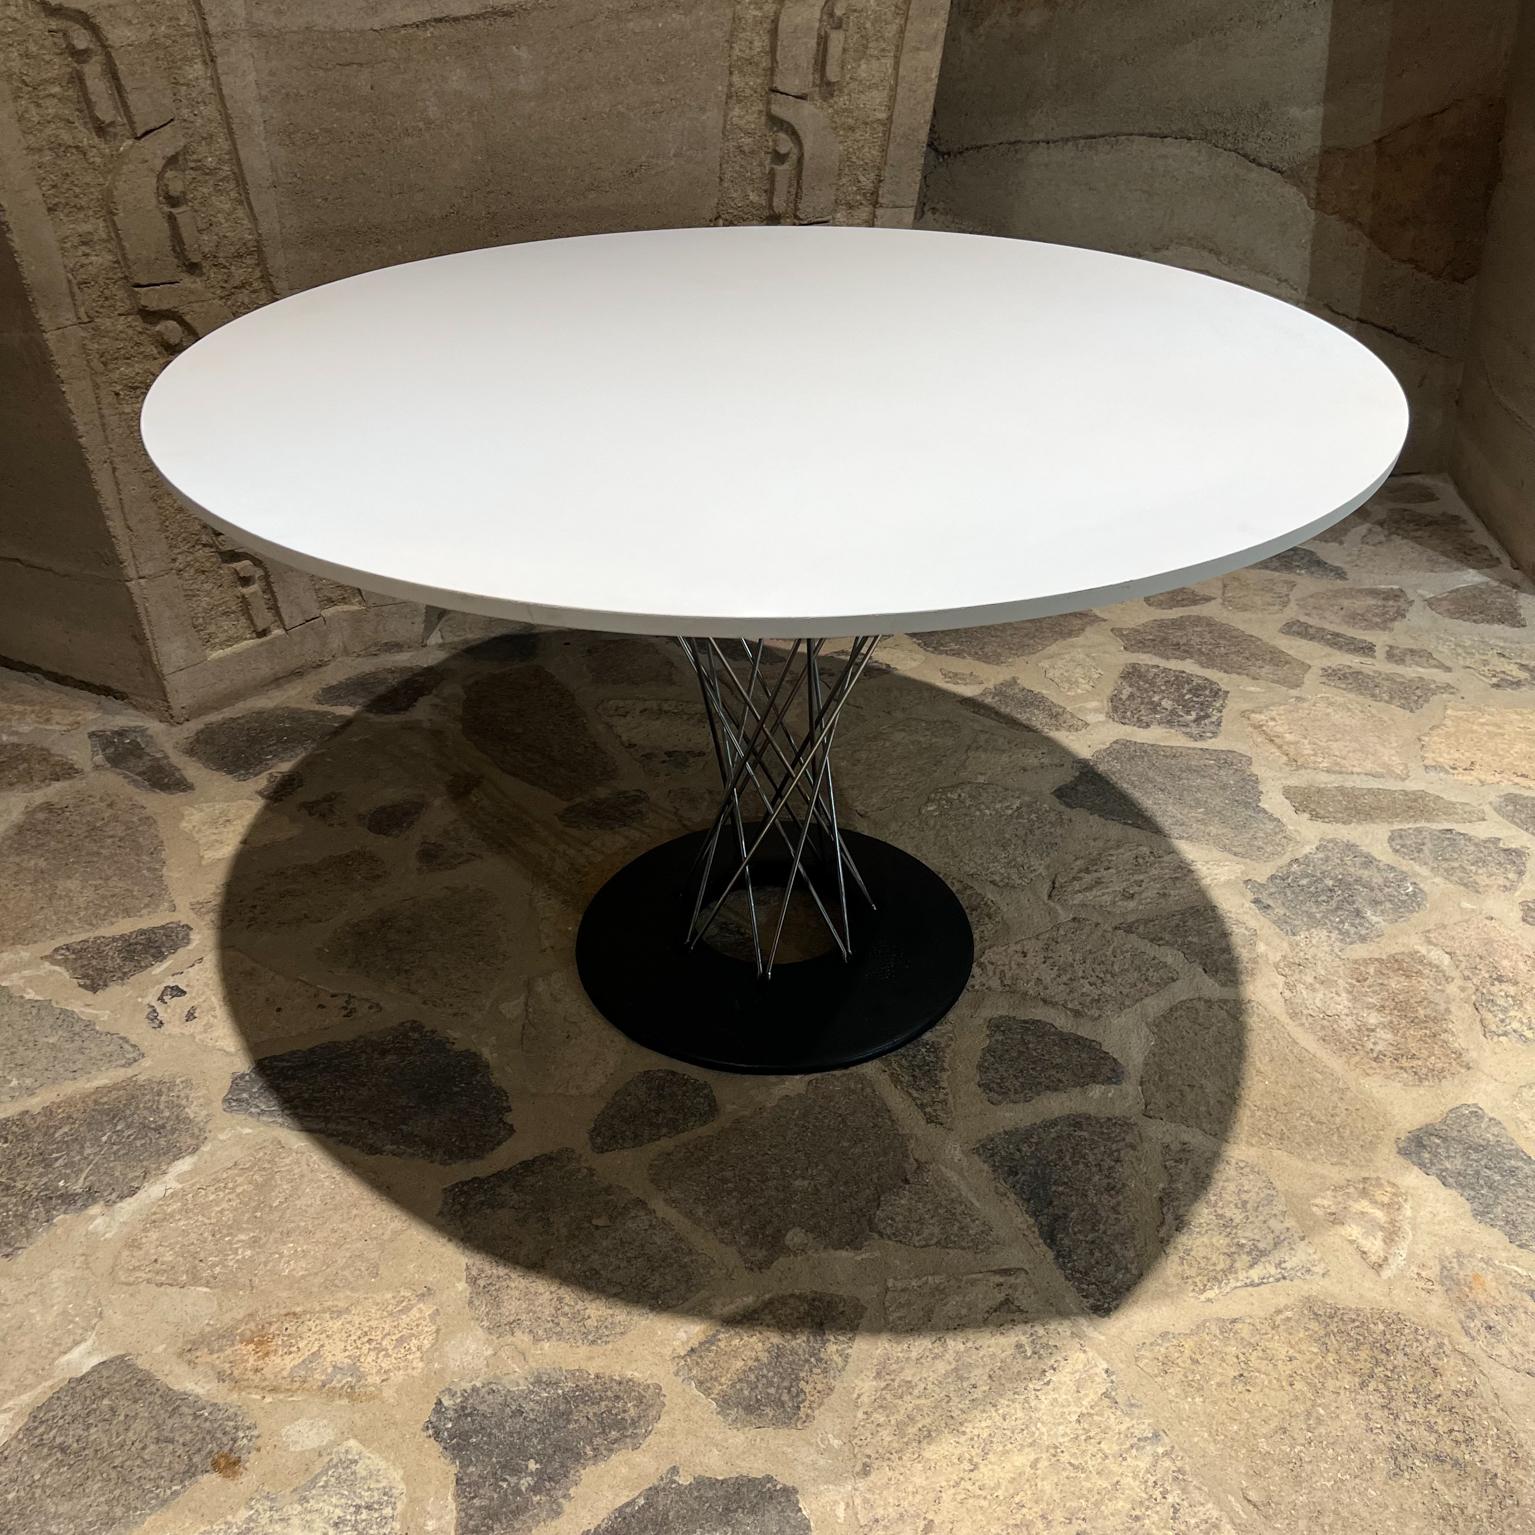 1957 Original Mod Cyclone Dining Table Isamu Noguchi for Knoll + New Top In Good Condition For Sale In Chula Vista, CA